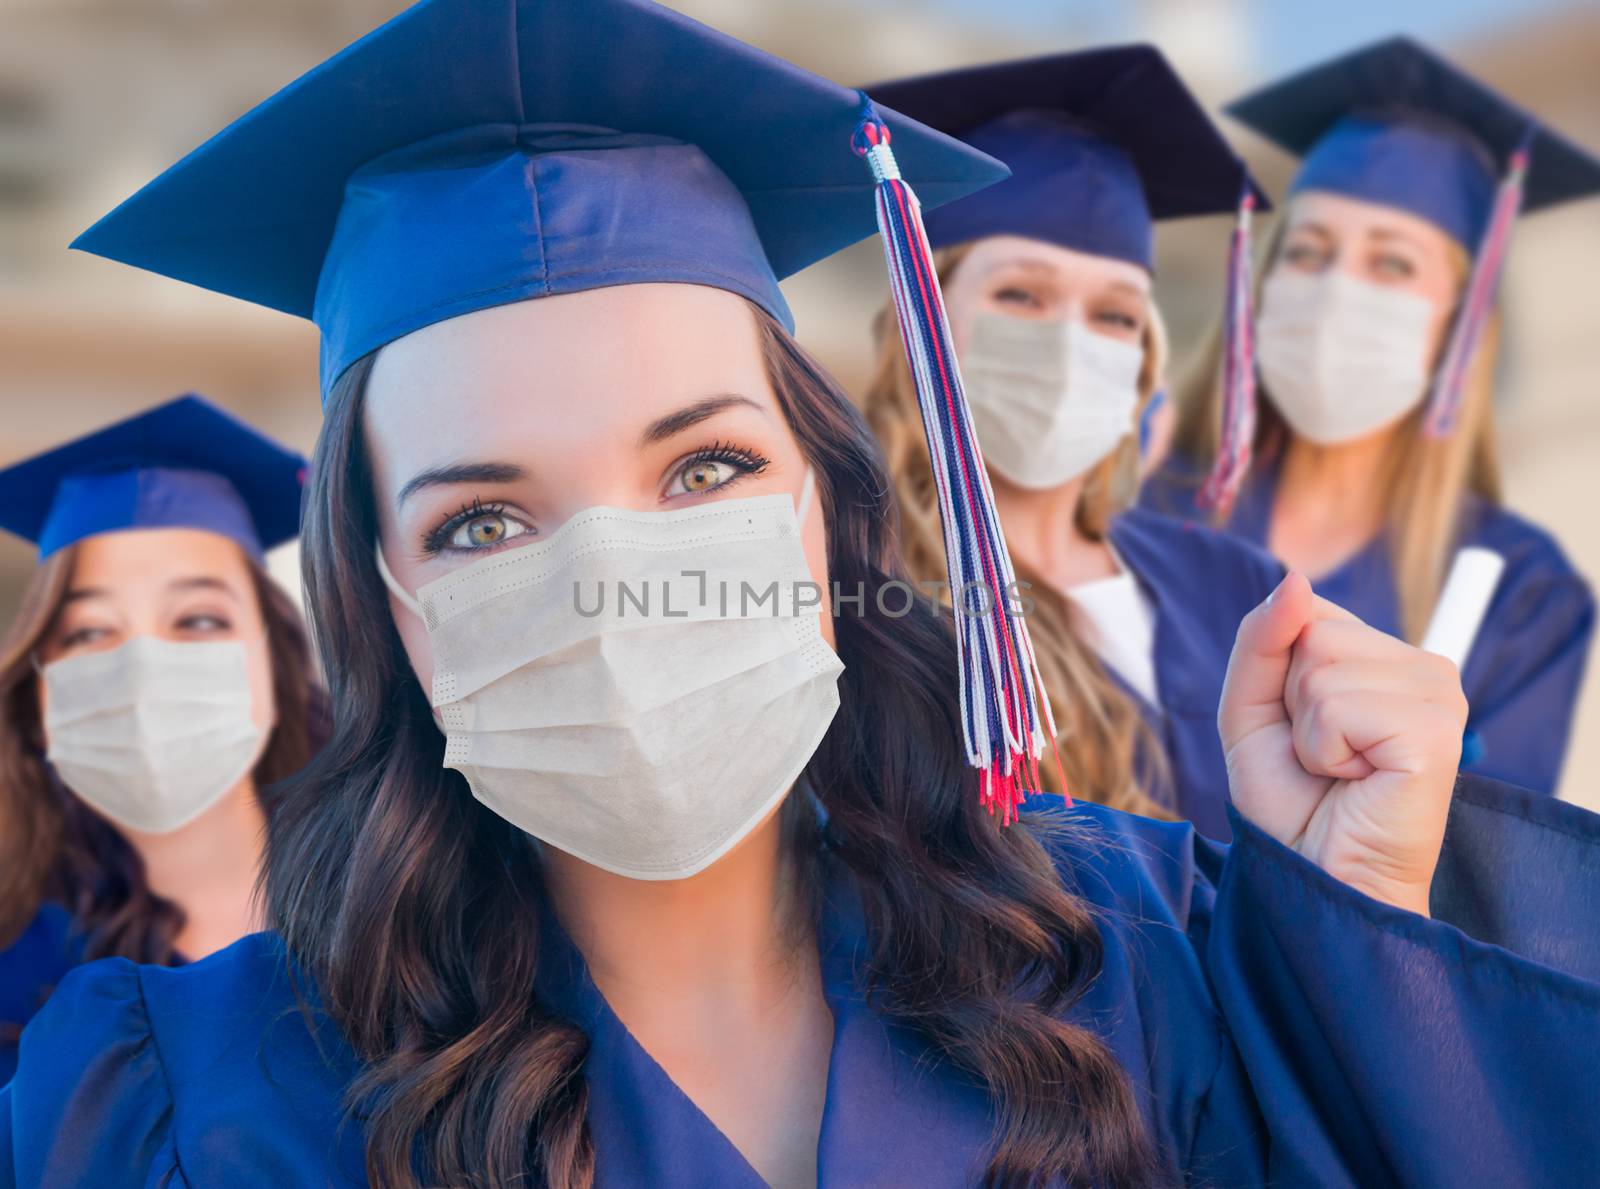 Several Female Graduates in Cap and Gown Wearing Medical Face Masks.